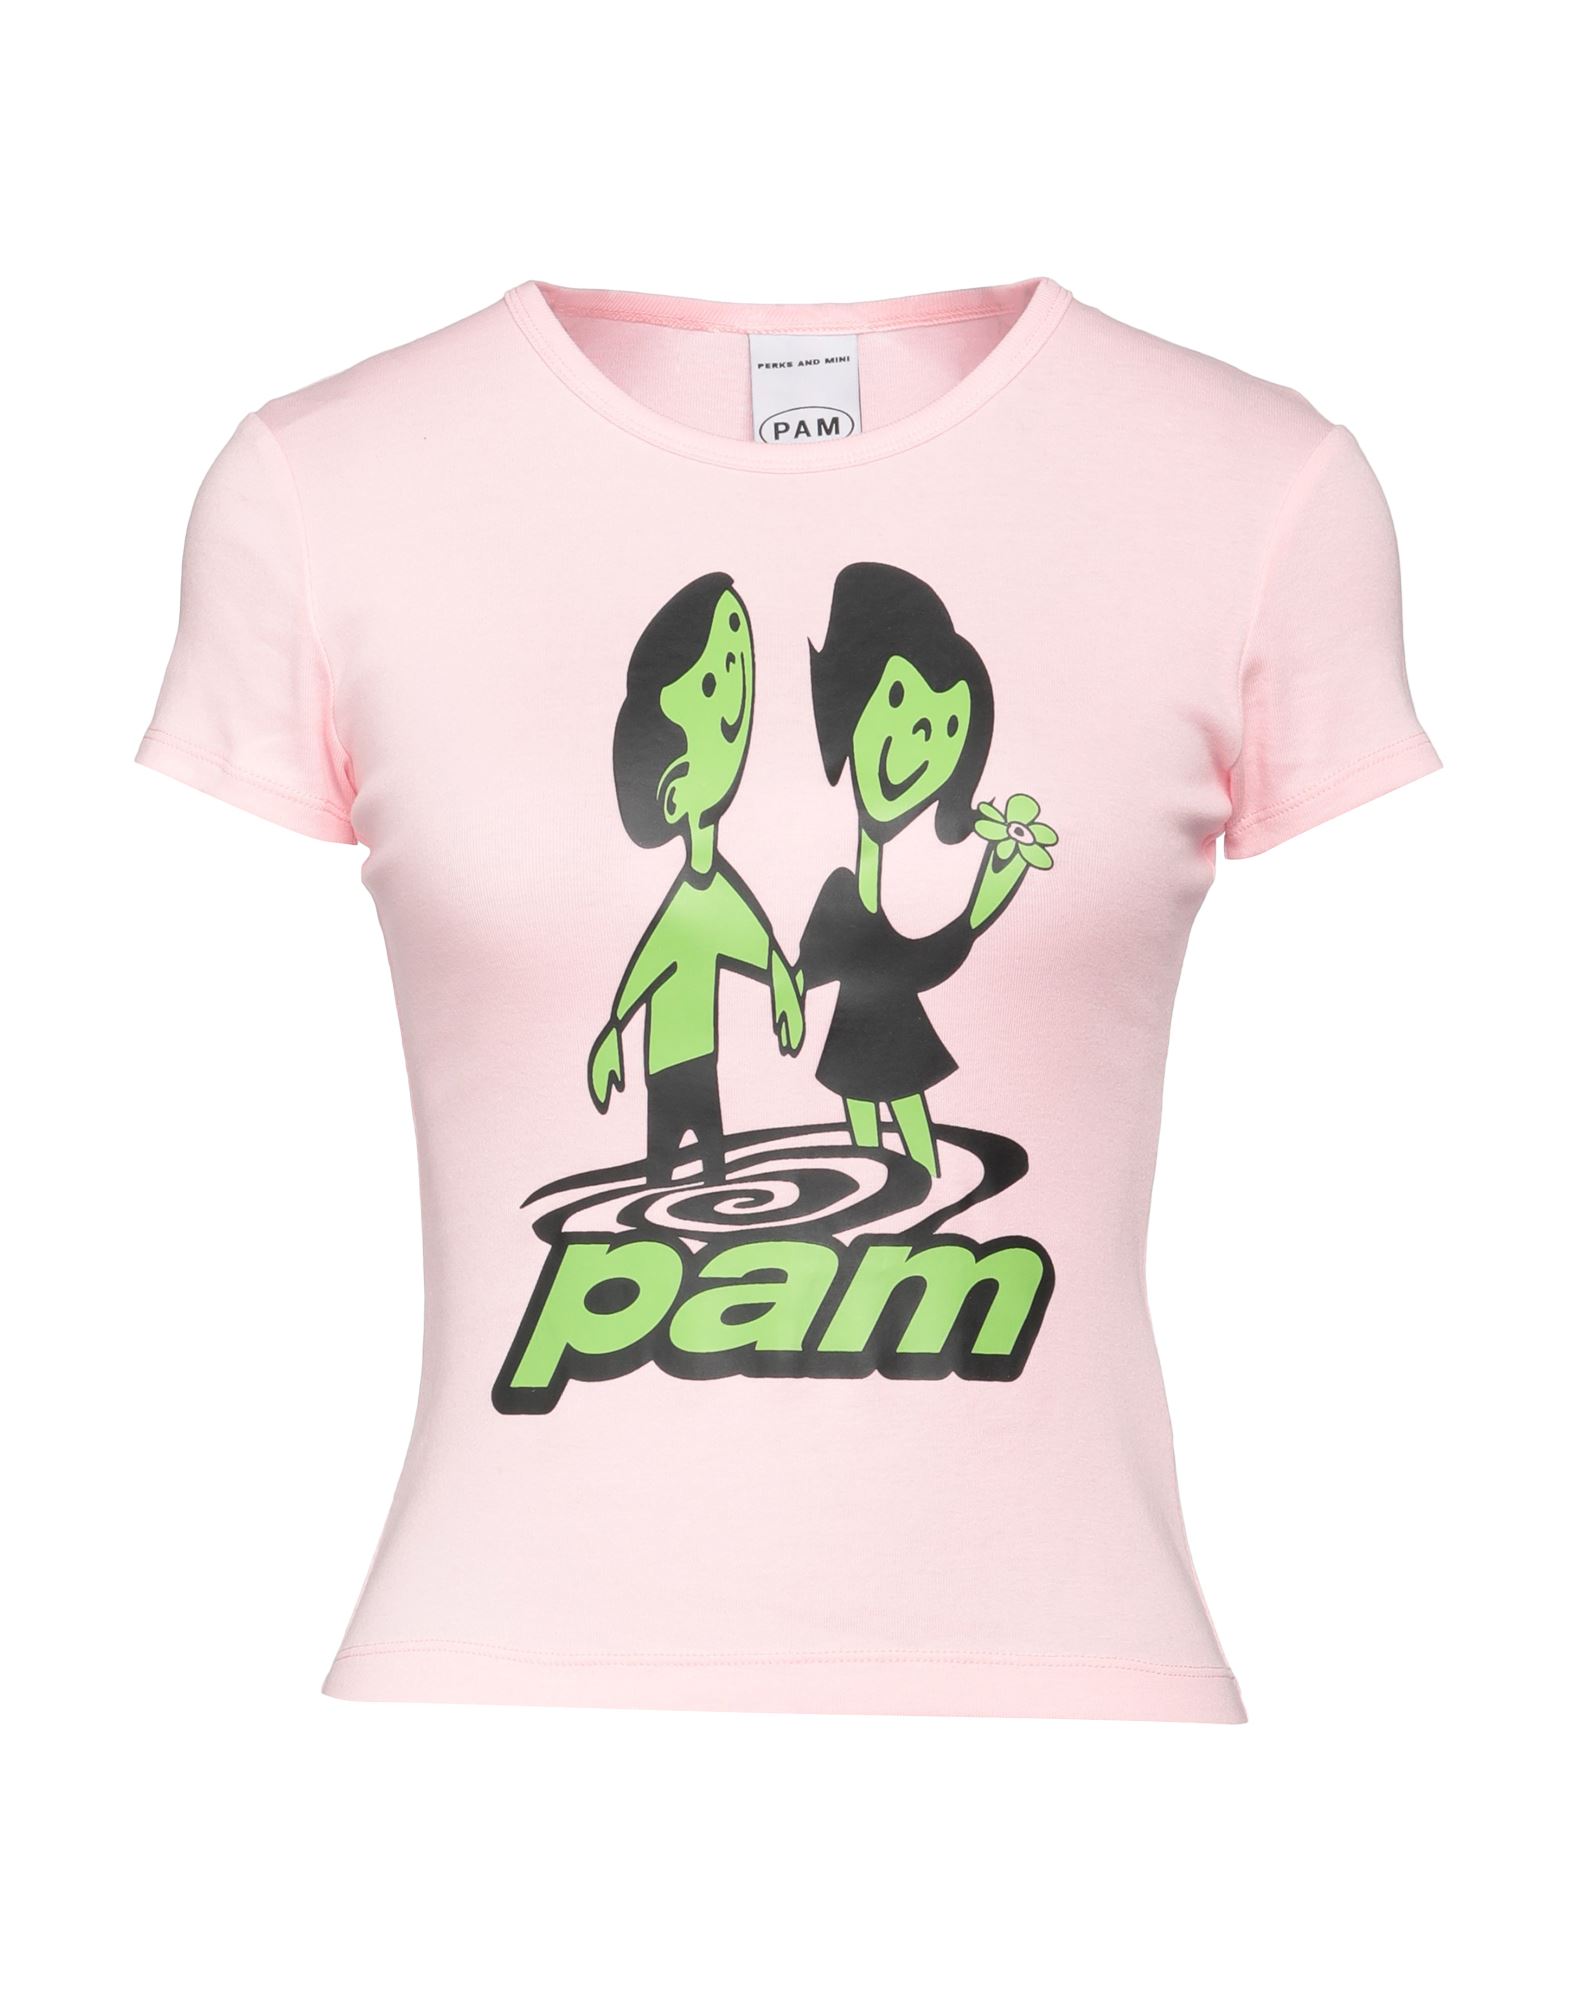 PERKS AND MINI P. A.M. PERKS AND MINI WOMAN T-SHIRT PINK SIZE S COTTON, ELASTANE